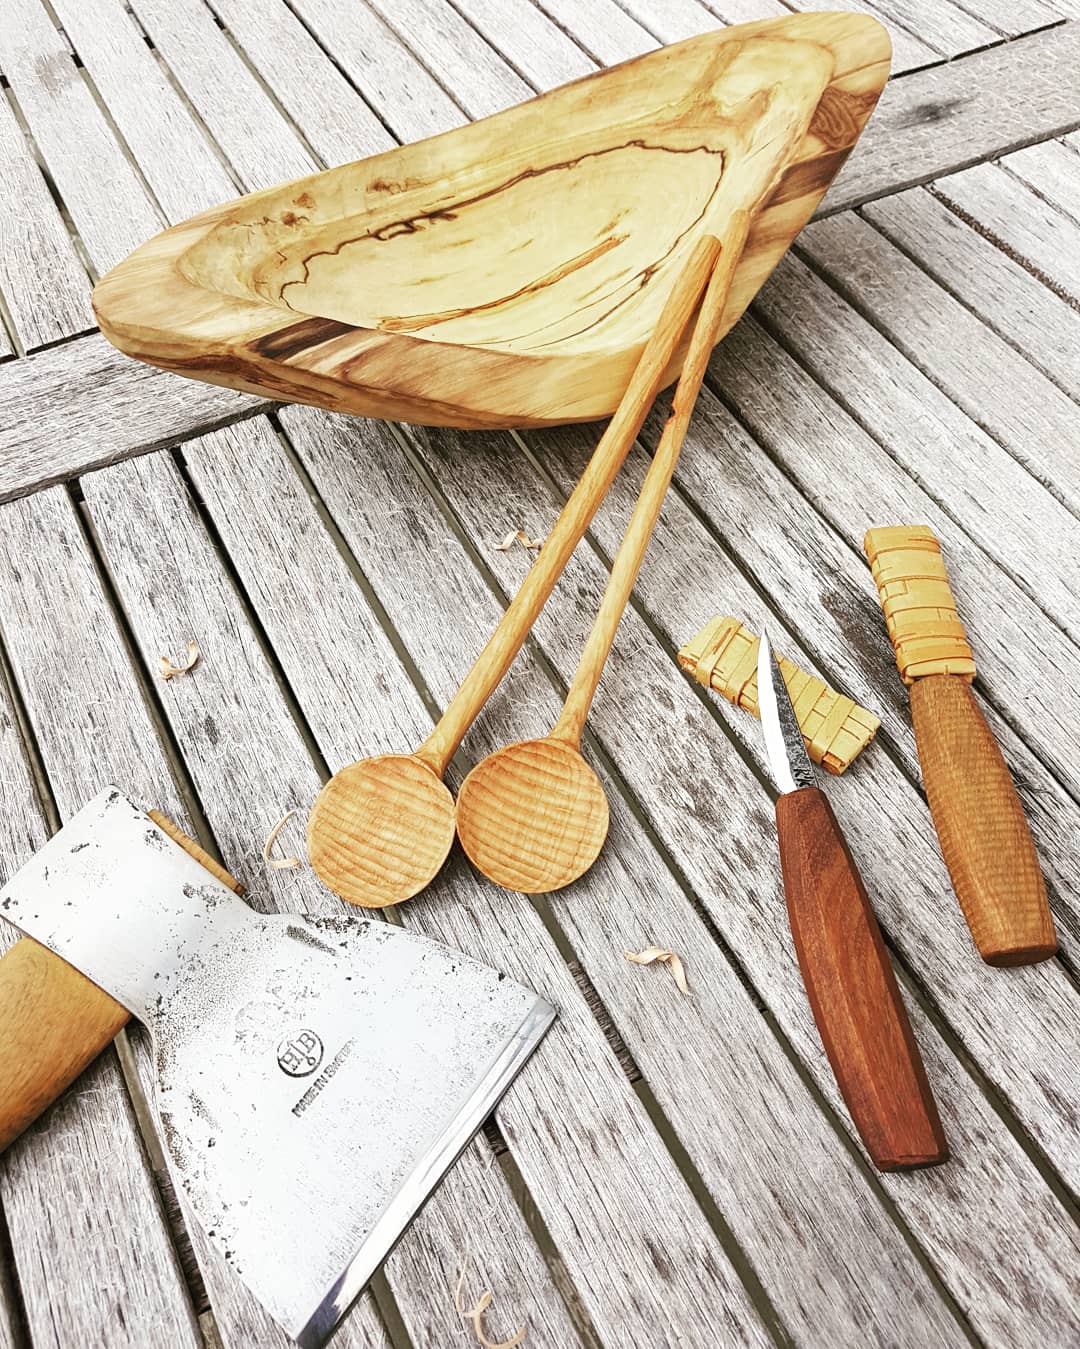 Wooden spoons, knives, axe, and other wood carvings